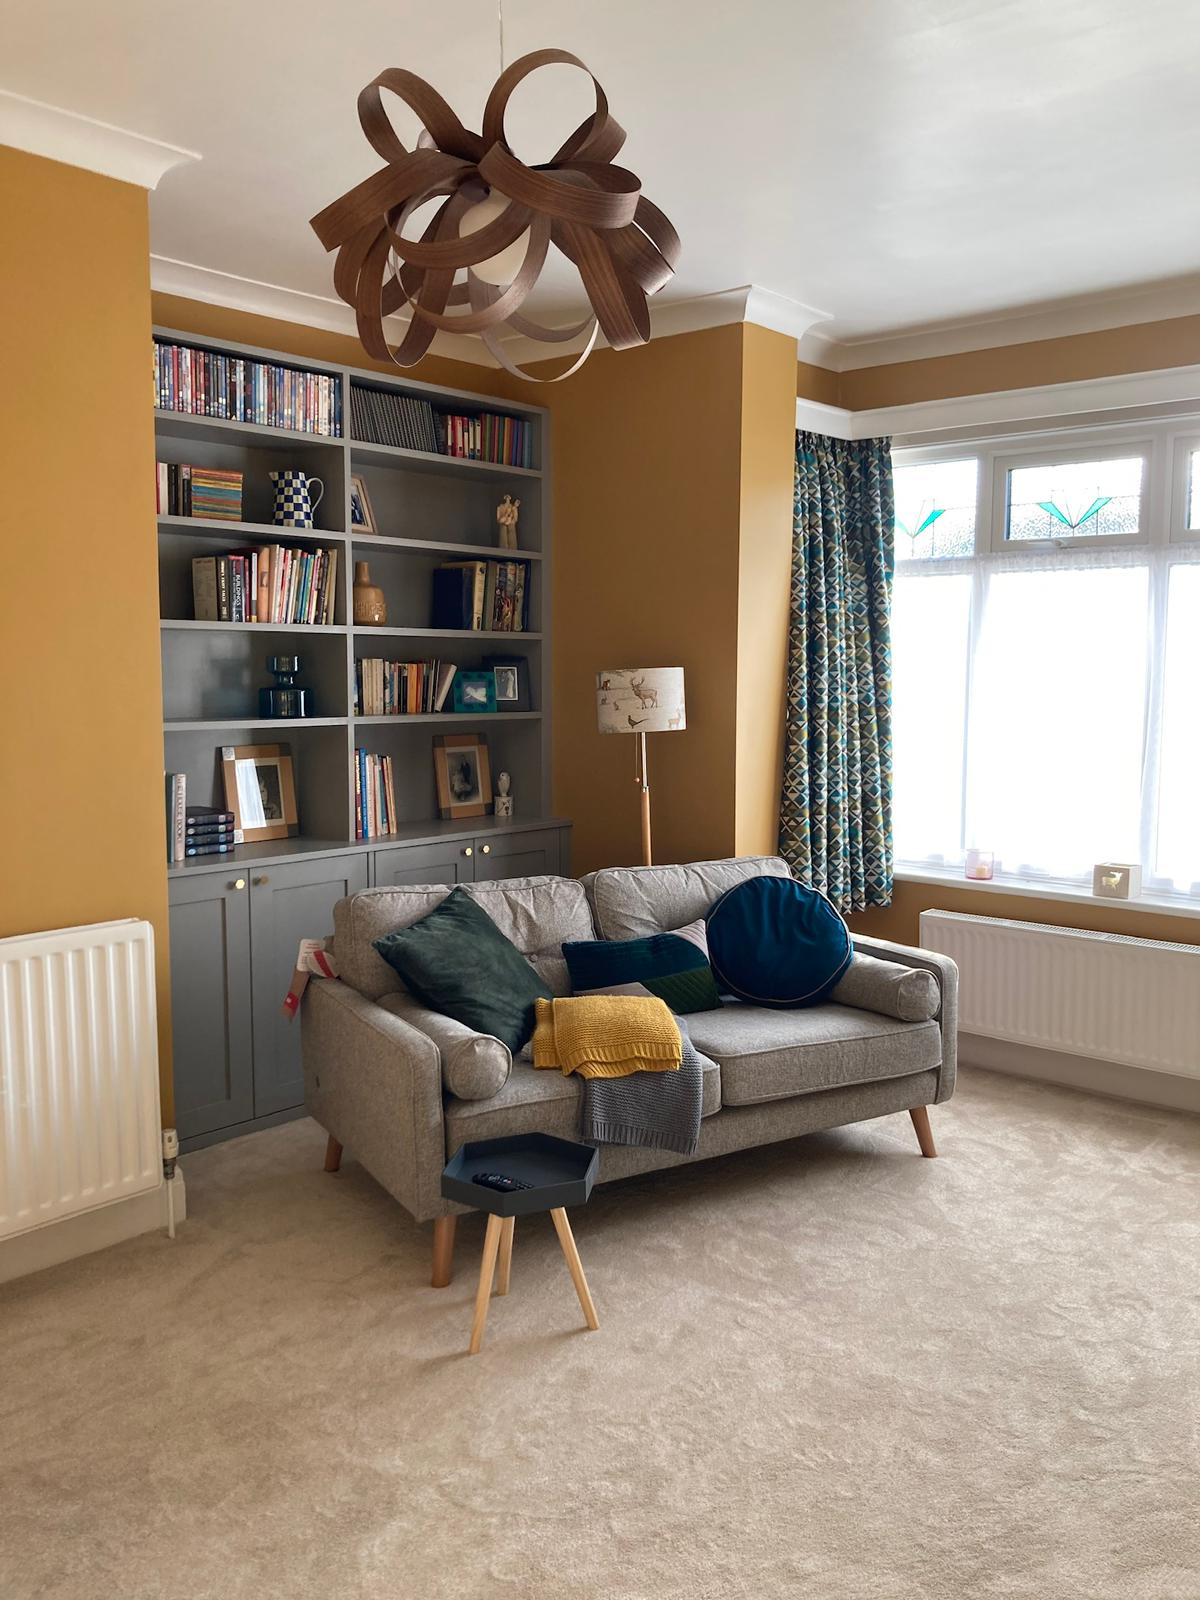 Bespoke alcove unit made into a beautiful book shelf: library in Harrogate by Joiner at Bailey Joinery